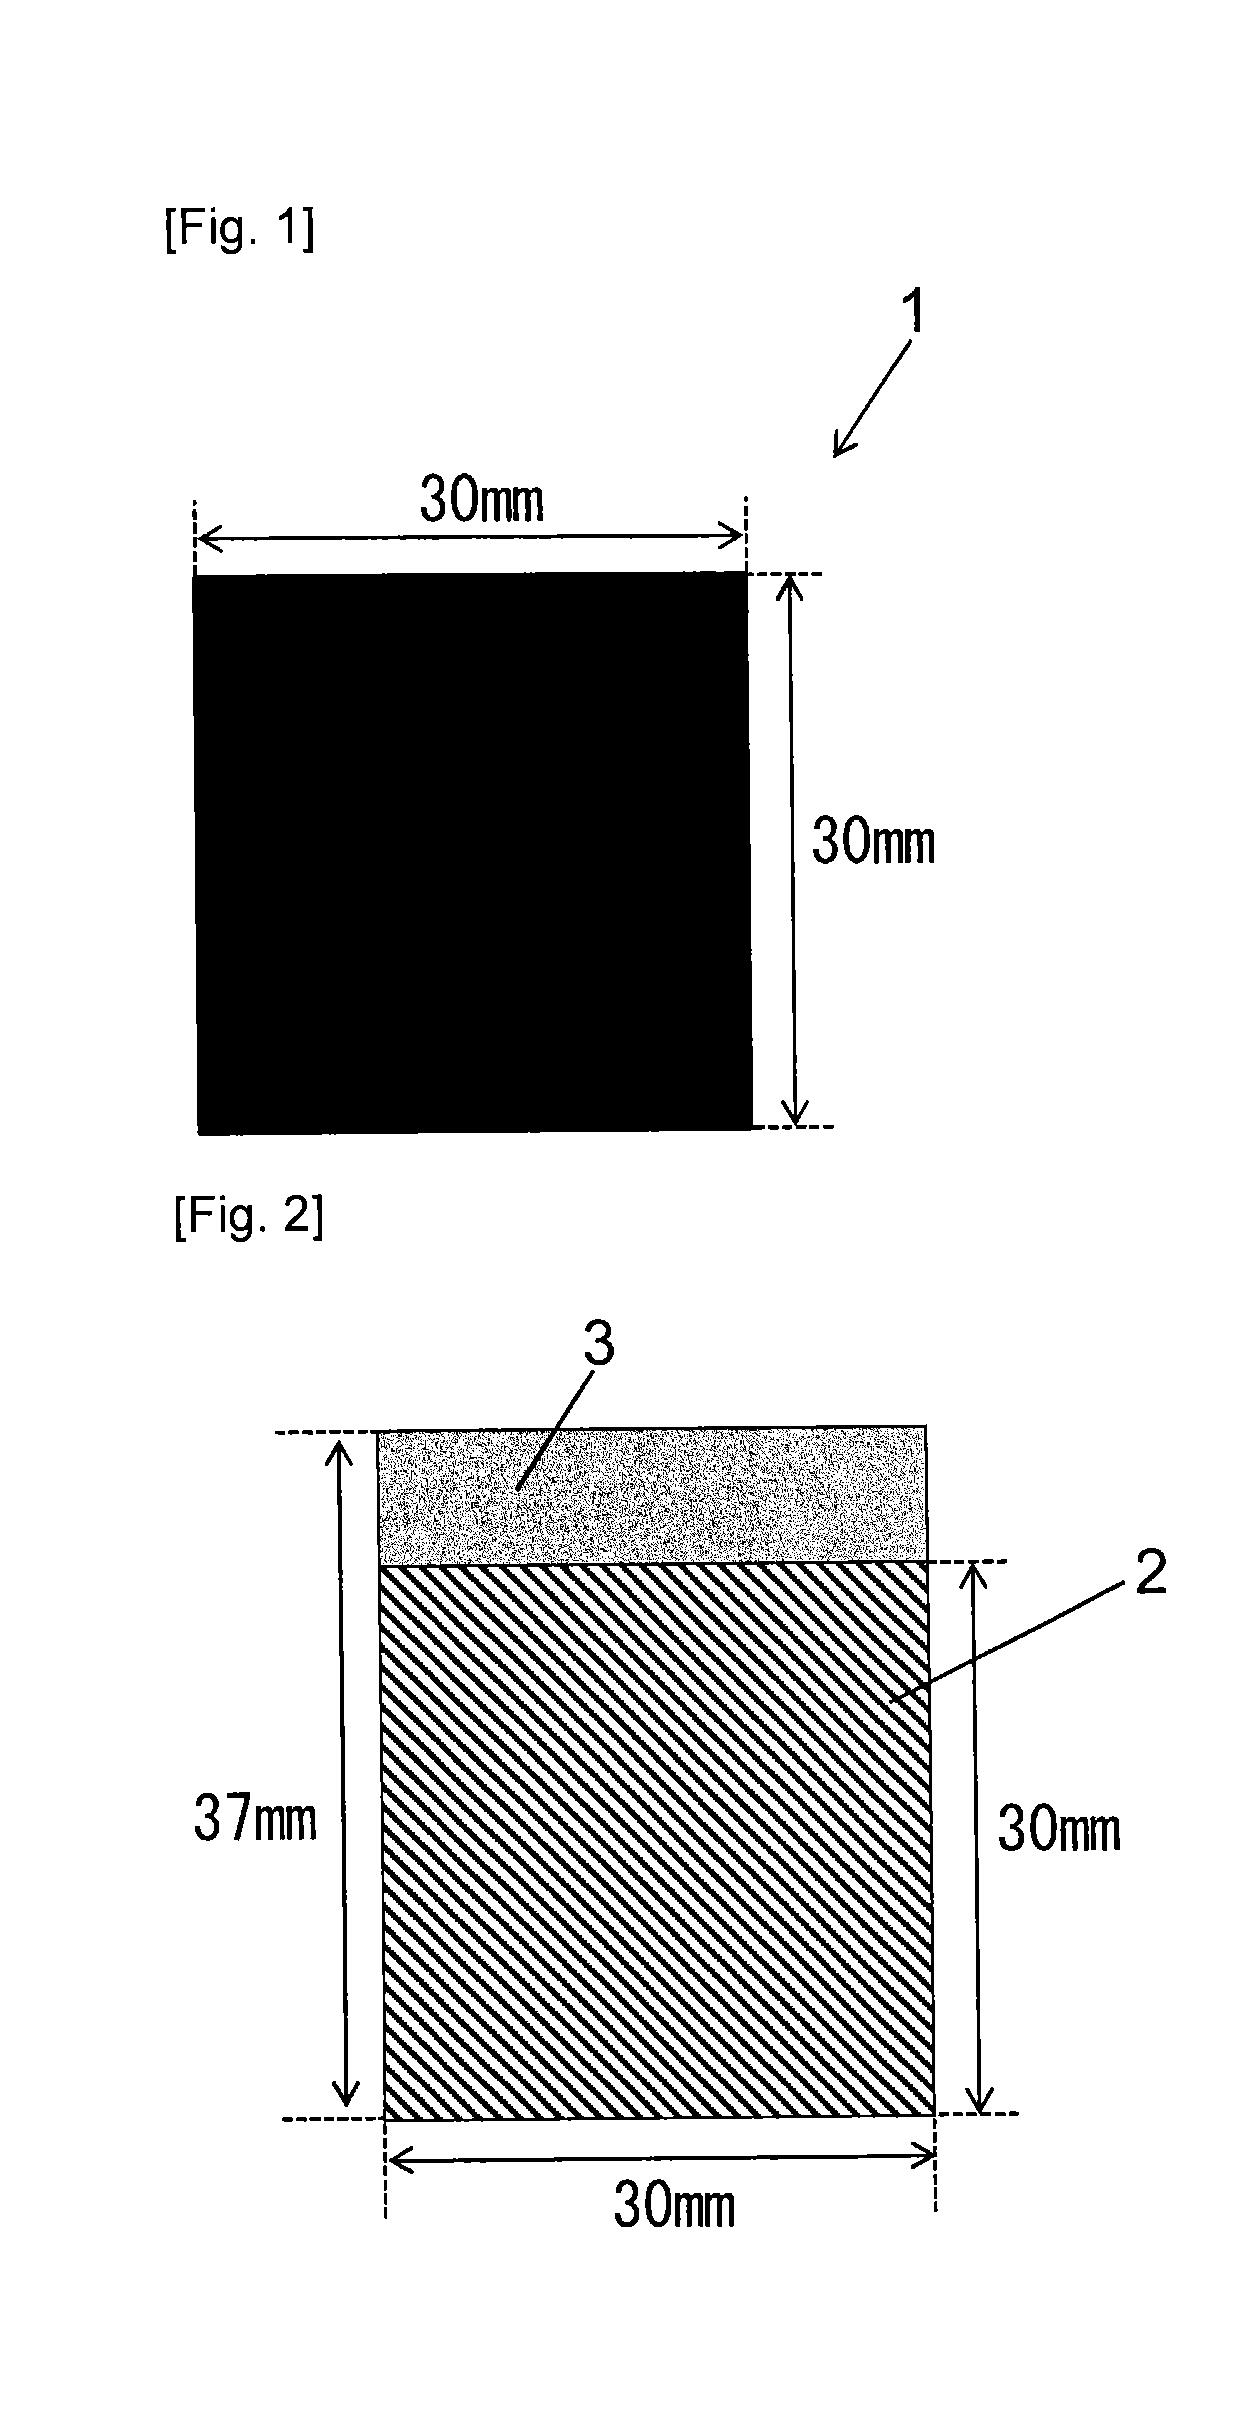 Carbon material for polarizable electrodes and method for producing same